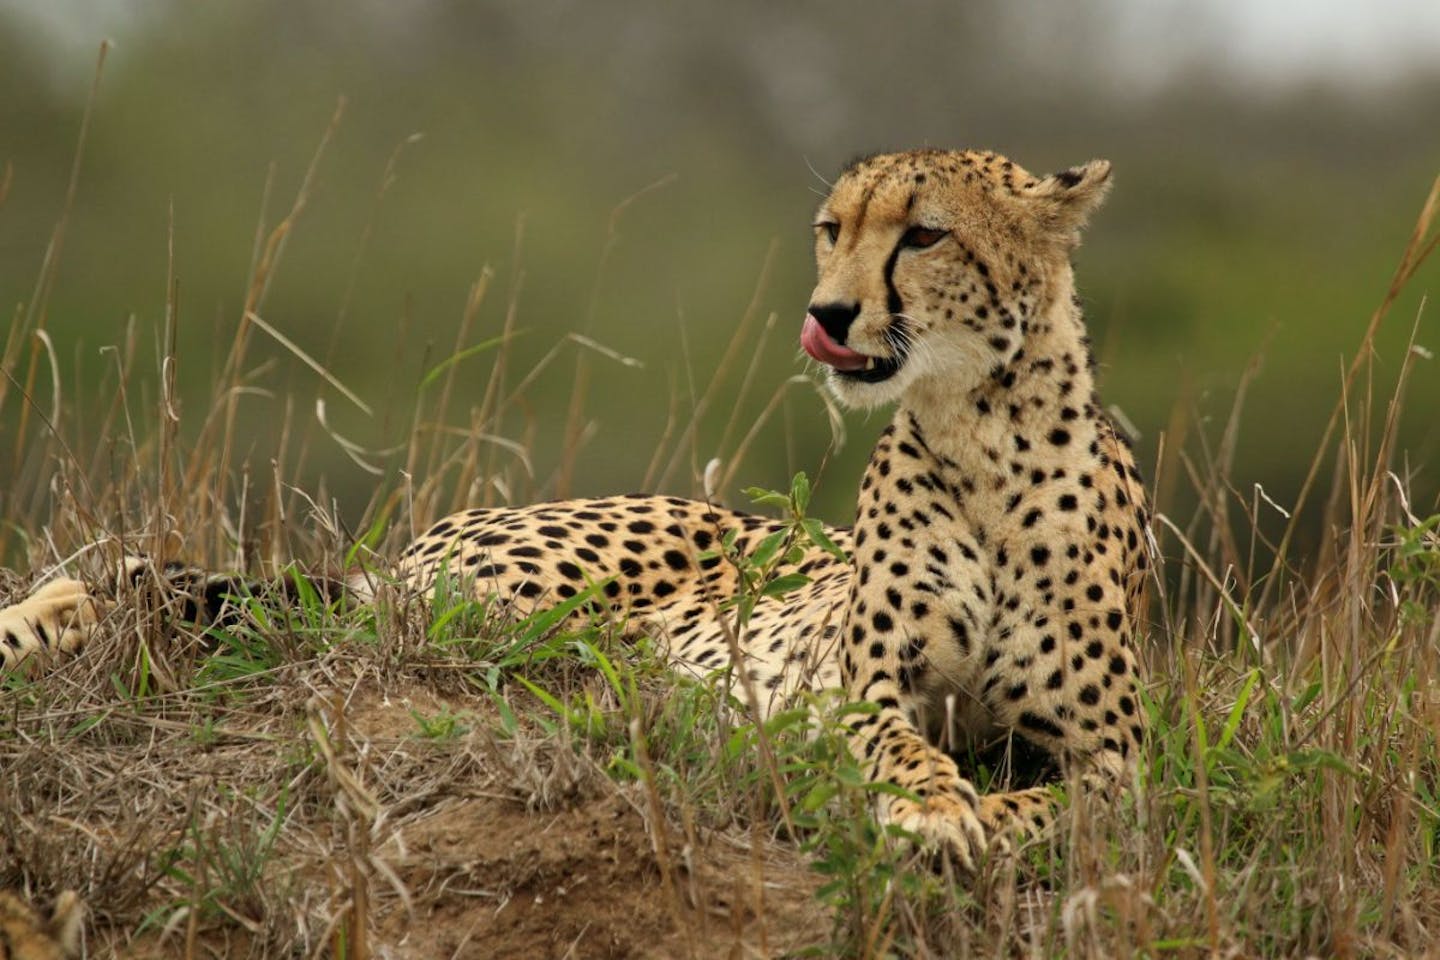 The cheetah's legacy: speed, survival, and adaptation